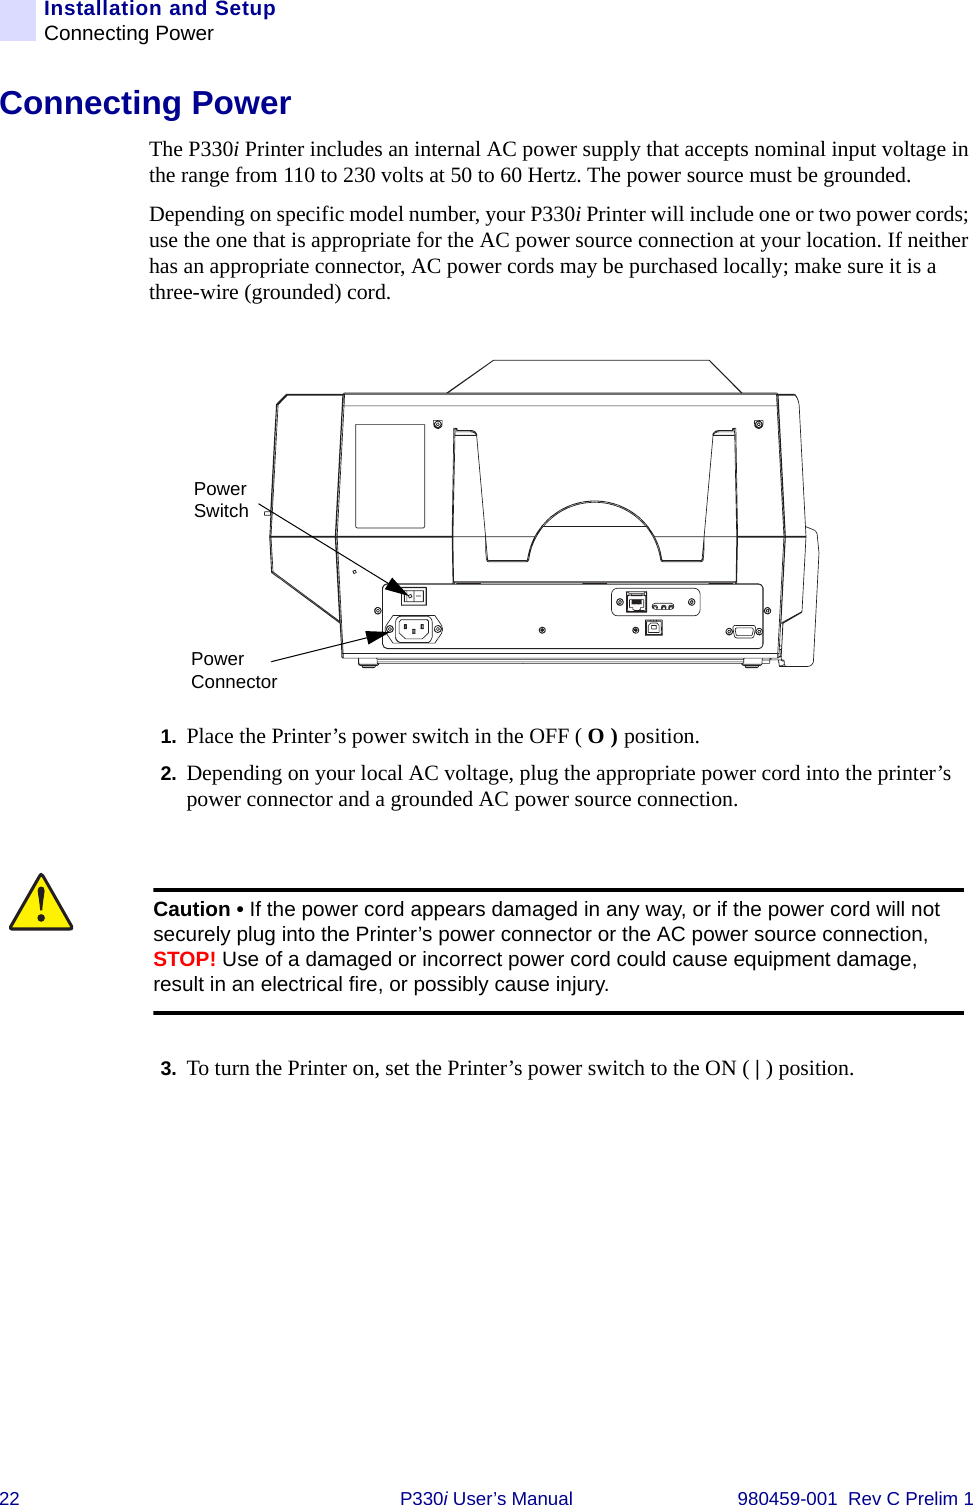 22 P330i User’s Manual 980459-001  Rev C Prelim 1Installation and SetupConnecting PowerConnecting PowerThe P330i Printer includes an internal AC power supply that accepts nominal input voltage in the range from 110 to 230 volts at 50 to 60 Hertz. The power source must be grounded.Depending on specific model number, your P330i Printer will include one or two power cords; use the one that is appropriate for the AC power source connection at your location. If neither has an appropriate connector, AC power cords may be purchased locally; make sure it is a three-wire (grounded) cord.1. Place the Printer’s power switch in the OFF ( O ) position.2. Depending on your local AC voltage, plug the appropriate power cord into the printer’s power connector and a grounded AC power source connection.3. To turn the Printer on, set the Printer’s power switch to the ON ( | ) position.Power ConnectorPower SwitchCaution • If the power cord appears damaged in any way, or if the power cord will not securely plug into the Printer’s power connector or the AC power source connection, STOP! Use of a damaged or incorrect power cord could cause equipment damage, result in an electrical fire, or possibly cause injury.